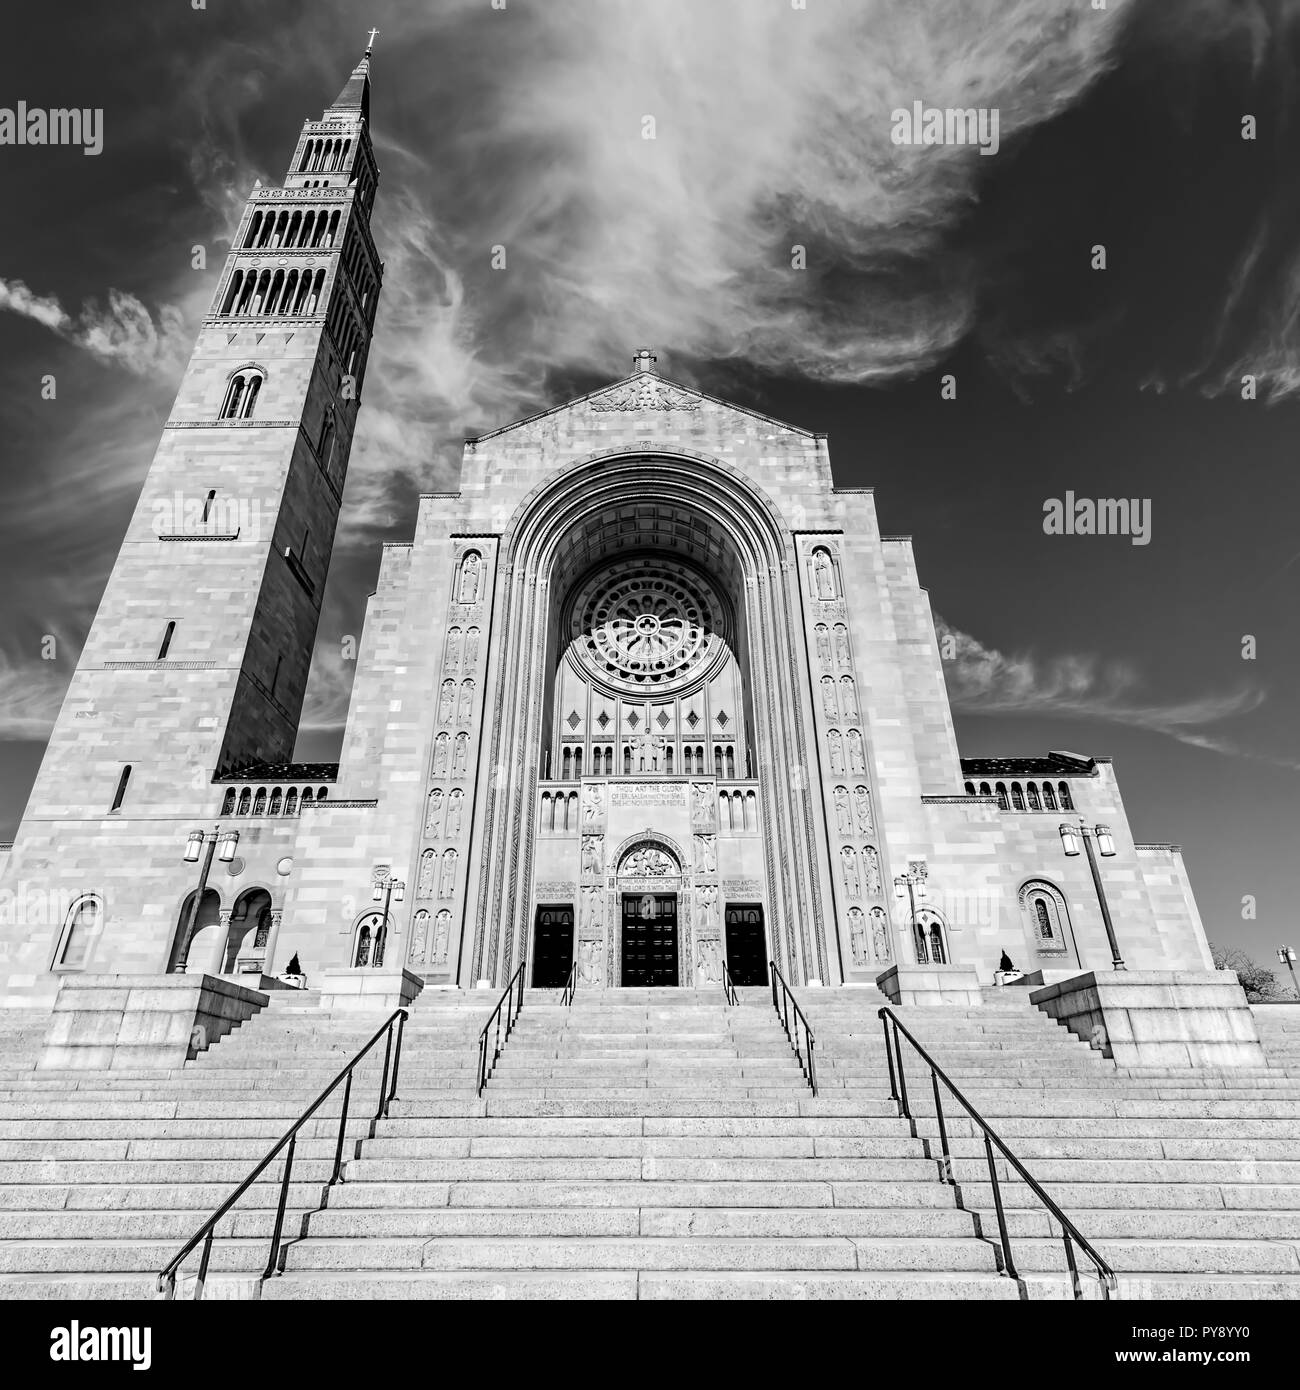 The largest Catholic church in North America, the Basilica of the National Shrine of the Immaculate Conception in Washington, DC. Stock Photo